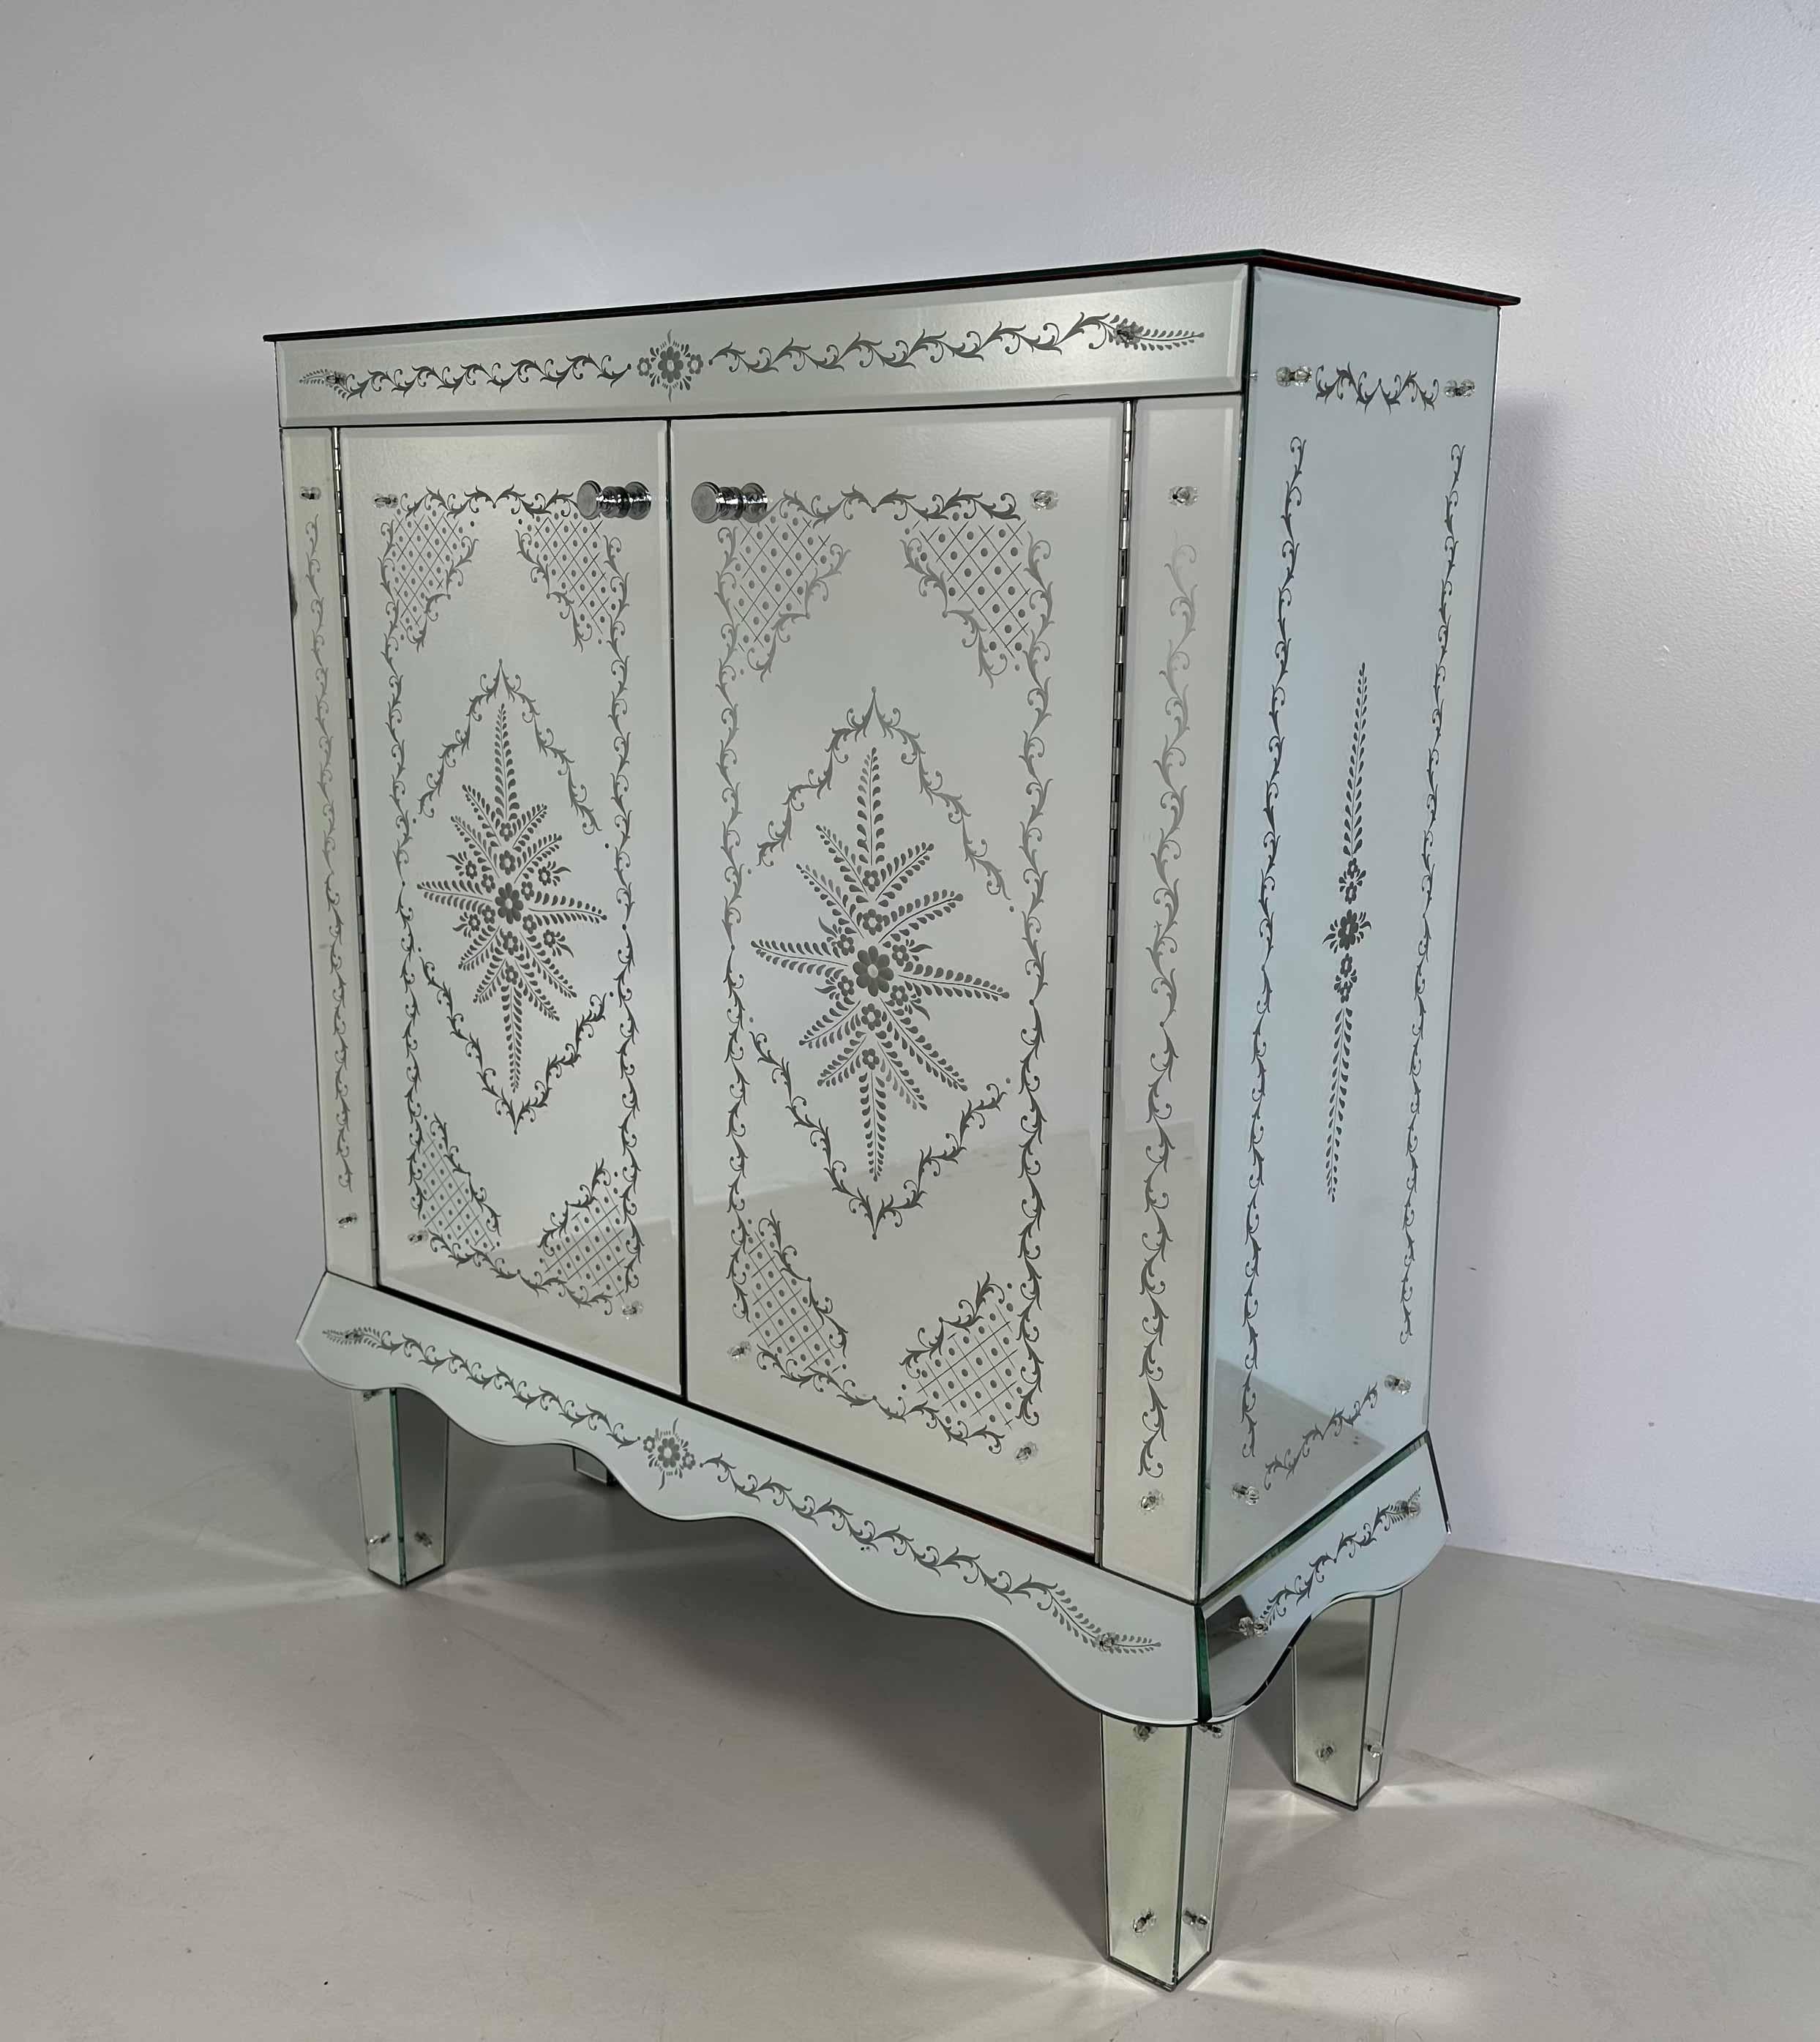 This Art Deco style Cabinet was produced in Italy in the 1980s circa. 
It is completely covered of Murano Glass bevelled panels. The real star of this piece is her majesty the engraving. The patterns on the mirrors, obtained by means of its grinding